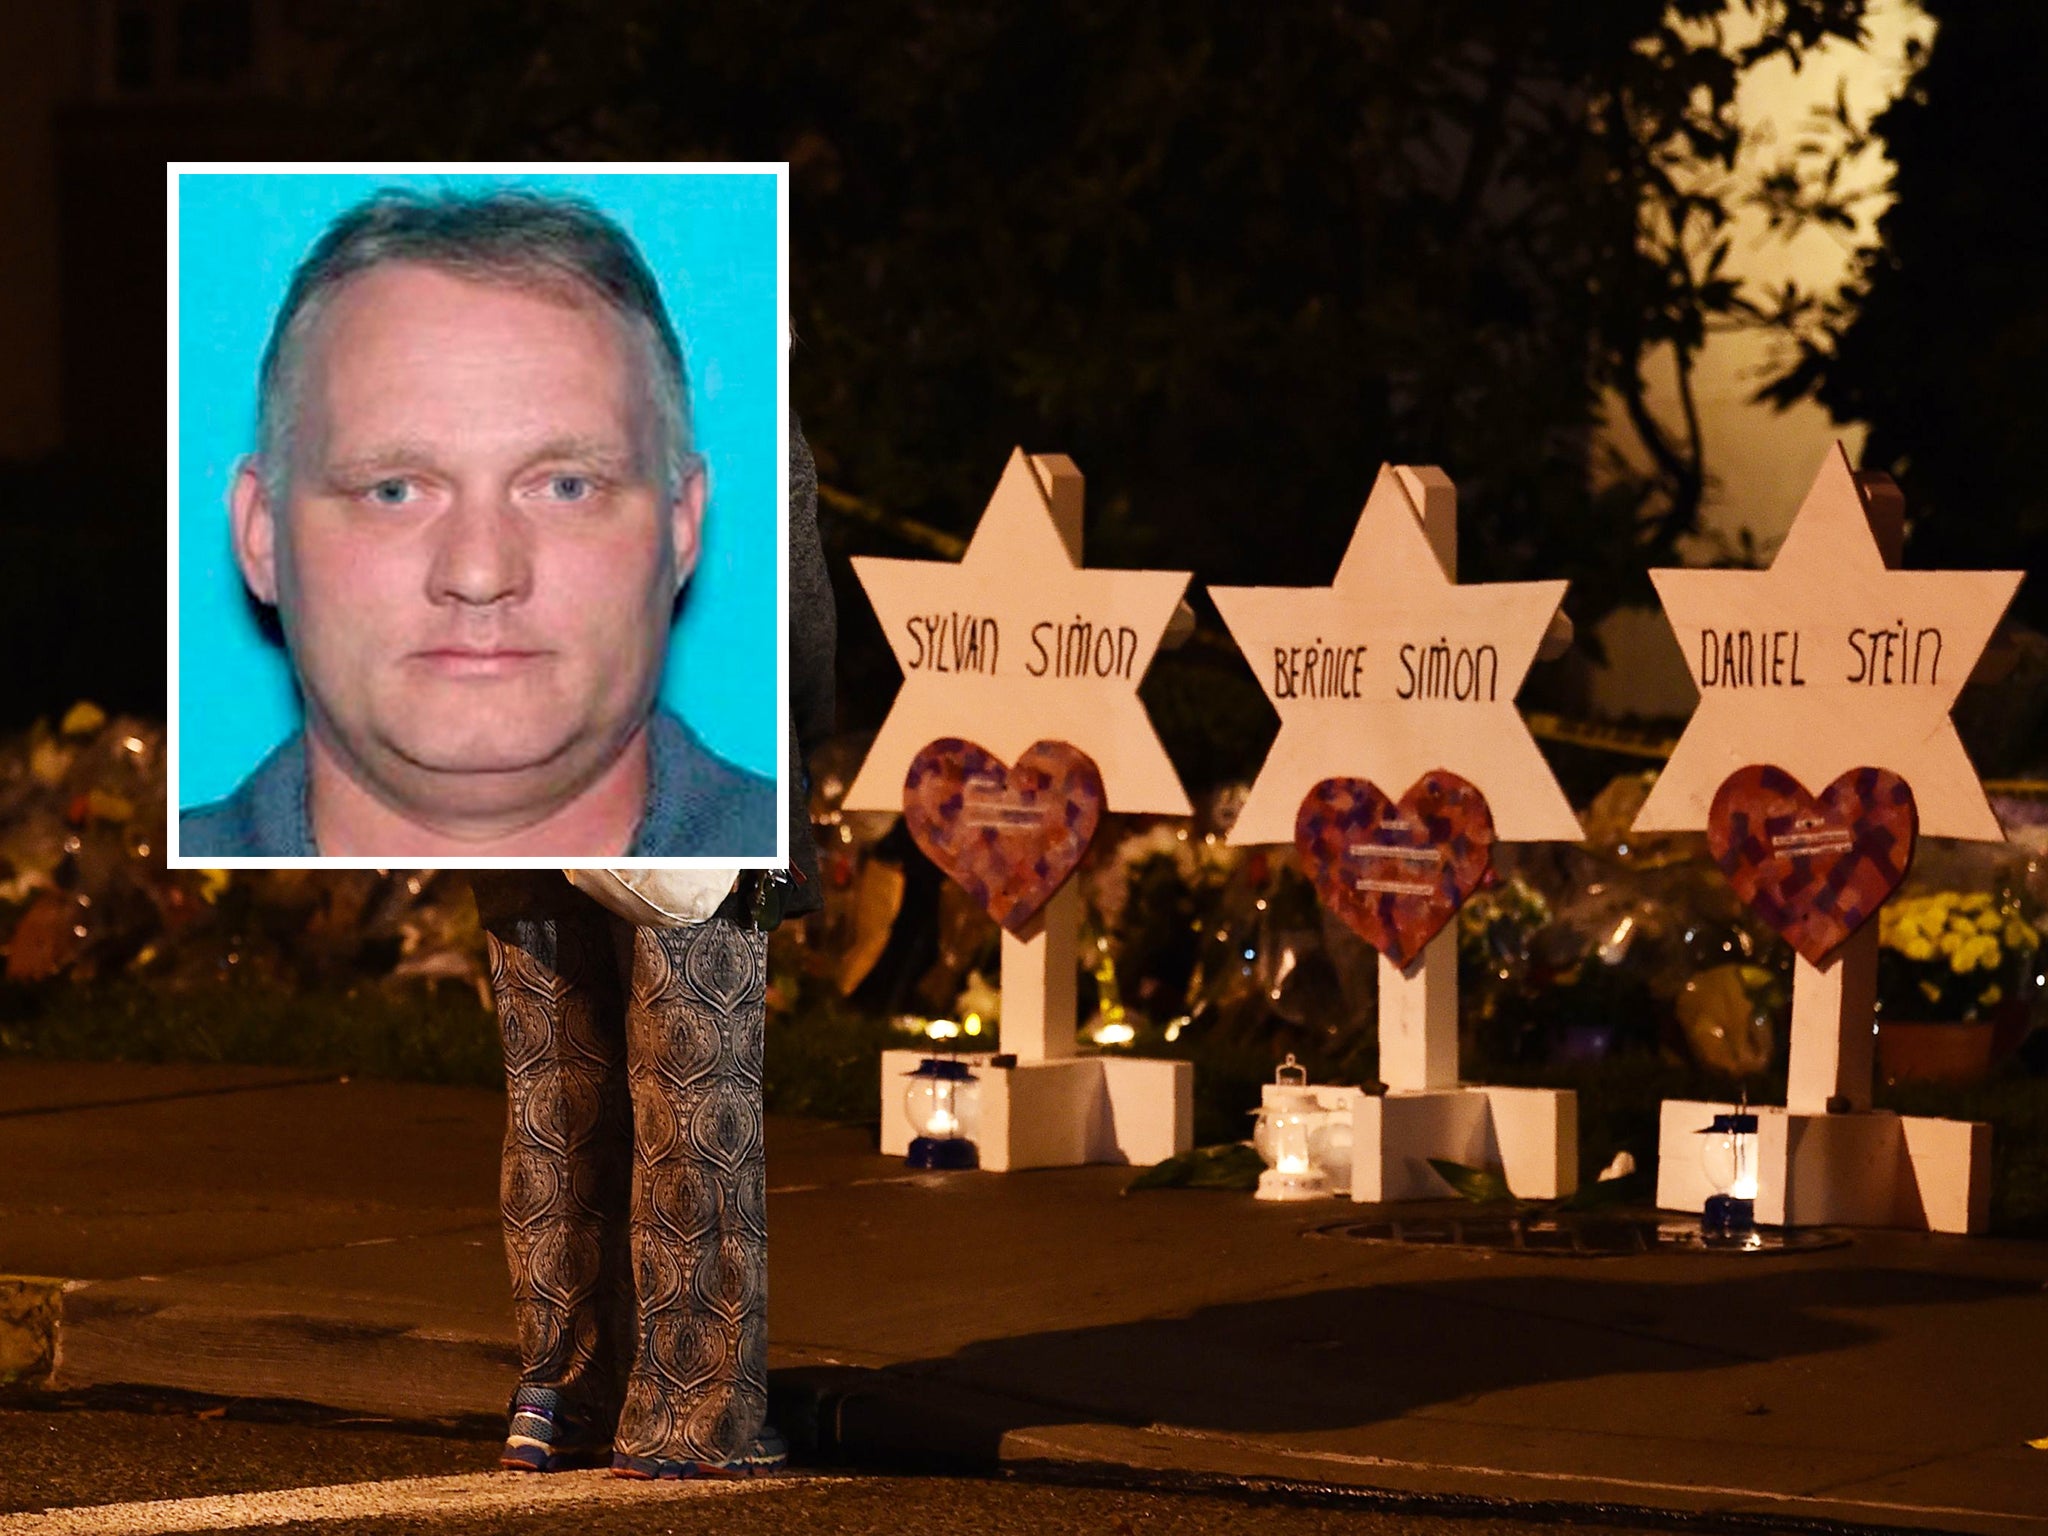 Robert Bowers (inset) left 11 people dead outside Pittsburgh synagogue